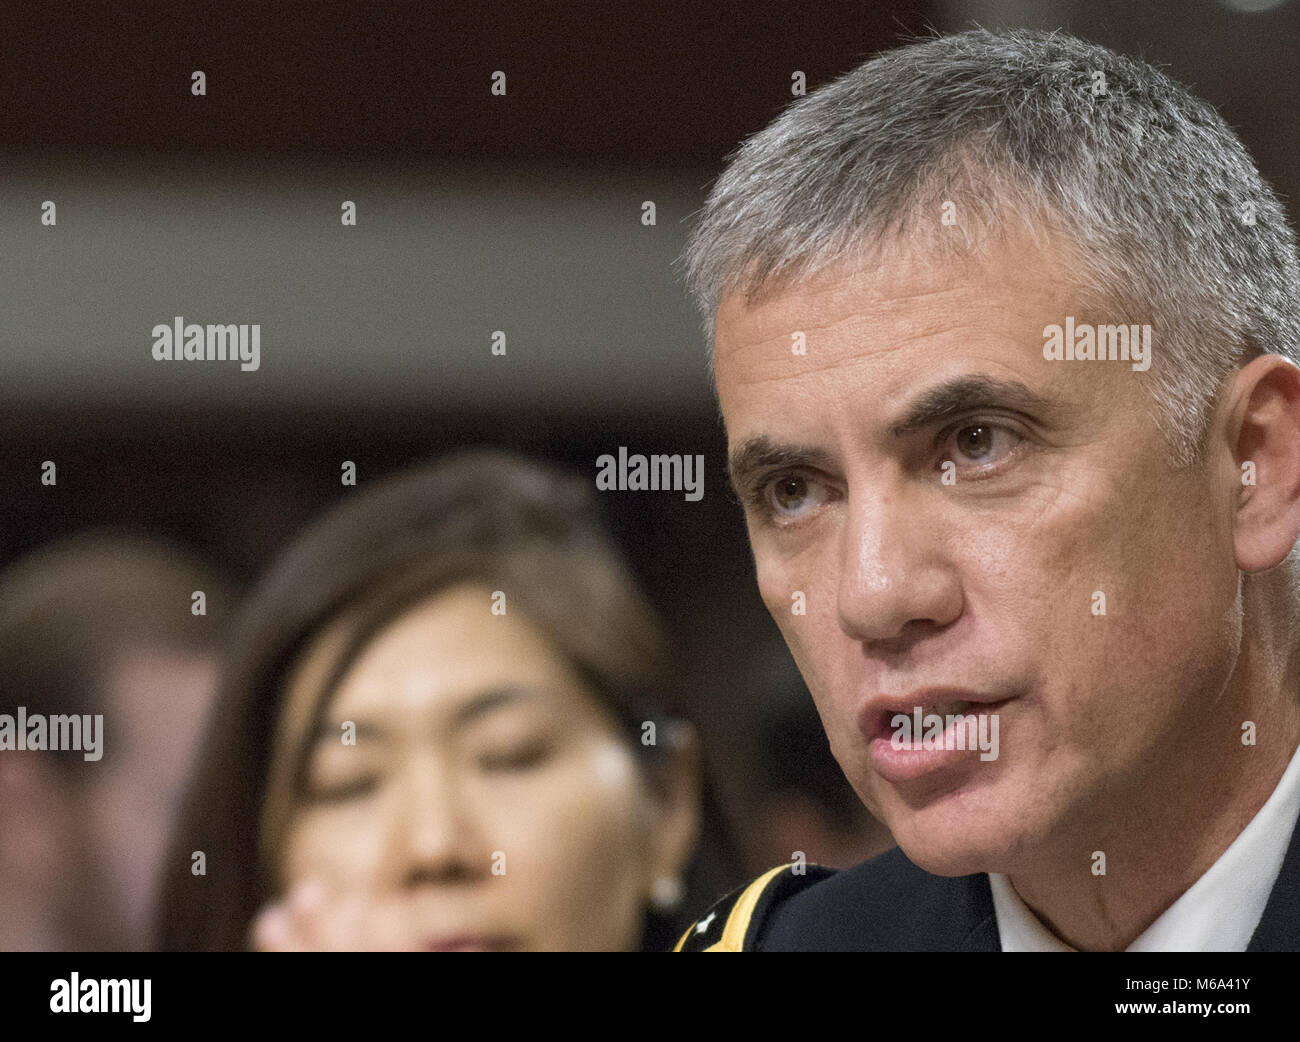 Washington, District of Columbia, USA. 1st Mar, 2018. Lieutenant General Paul M. Nakasone, United States Army, testifies before the US Senate Committee on Armed Services on his nomination to be General And Director, National Security Agency/Chief, Central Security Service/Commander, United States Cyber Command on Capitol Hill in Washington, DC on Thursday, March 1, 2018. If confirmed, Nakasone will replace US Navy Admiral Mike Rogers, who will be retiring.Credit: Ron Sachs/CNP Credit: Ron Sachs/CNP/ZUMA Wire/Alamy Live News Stock Photo